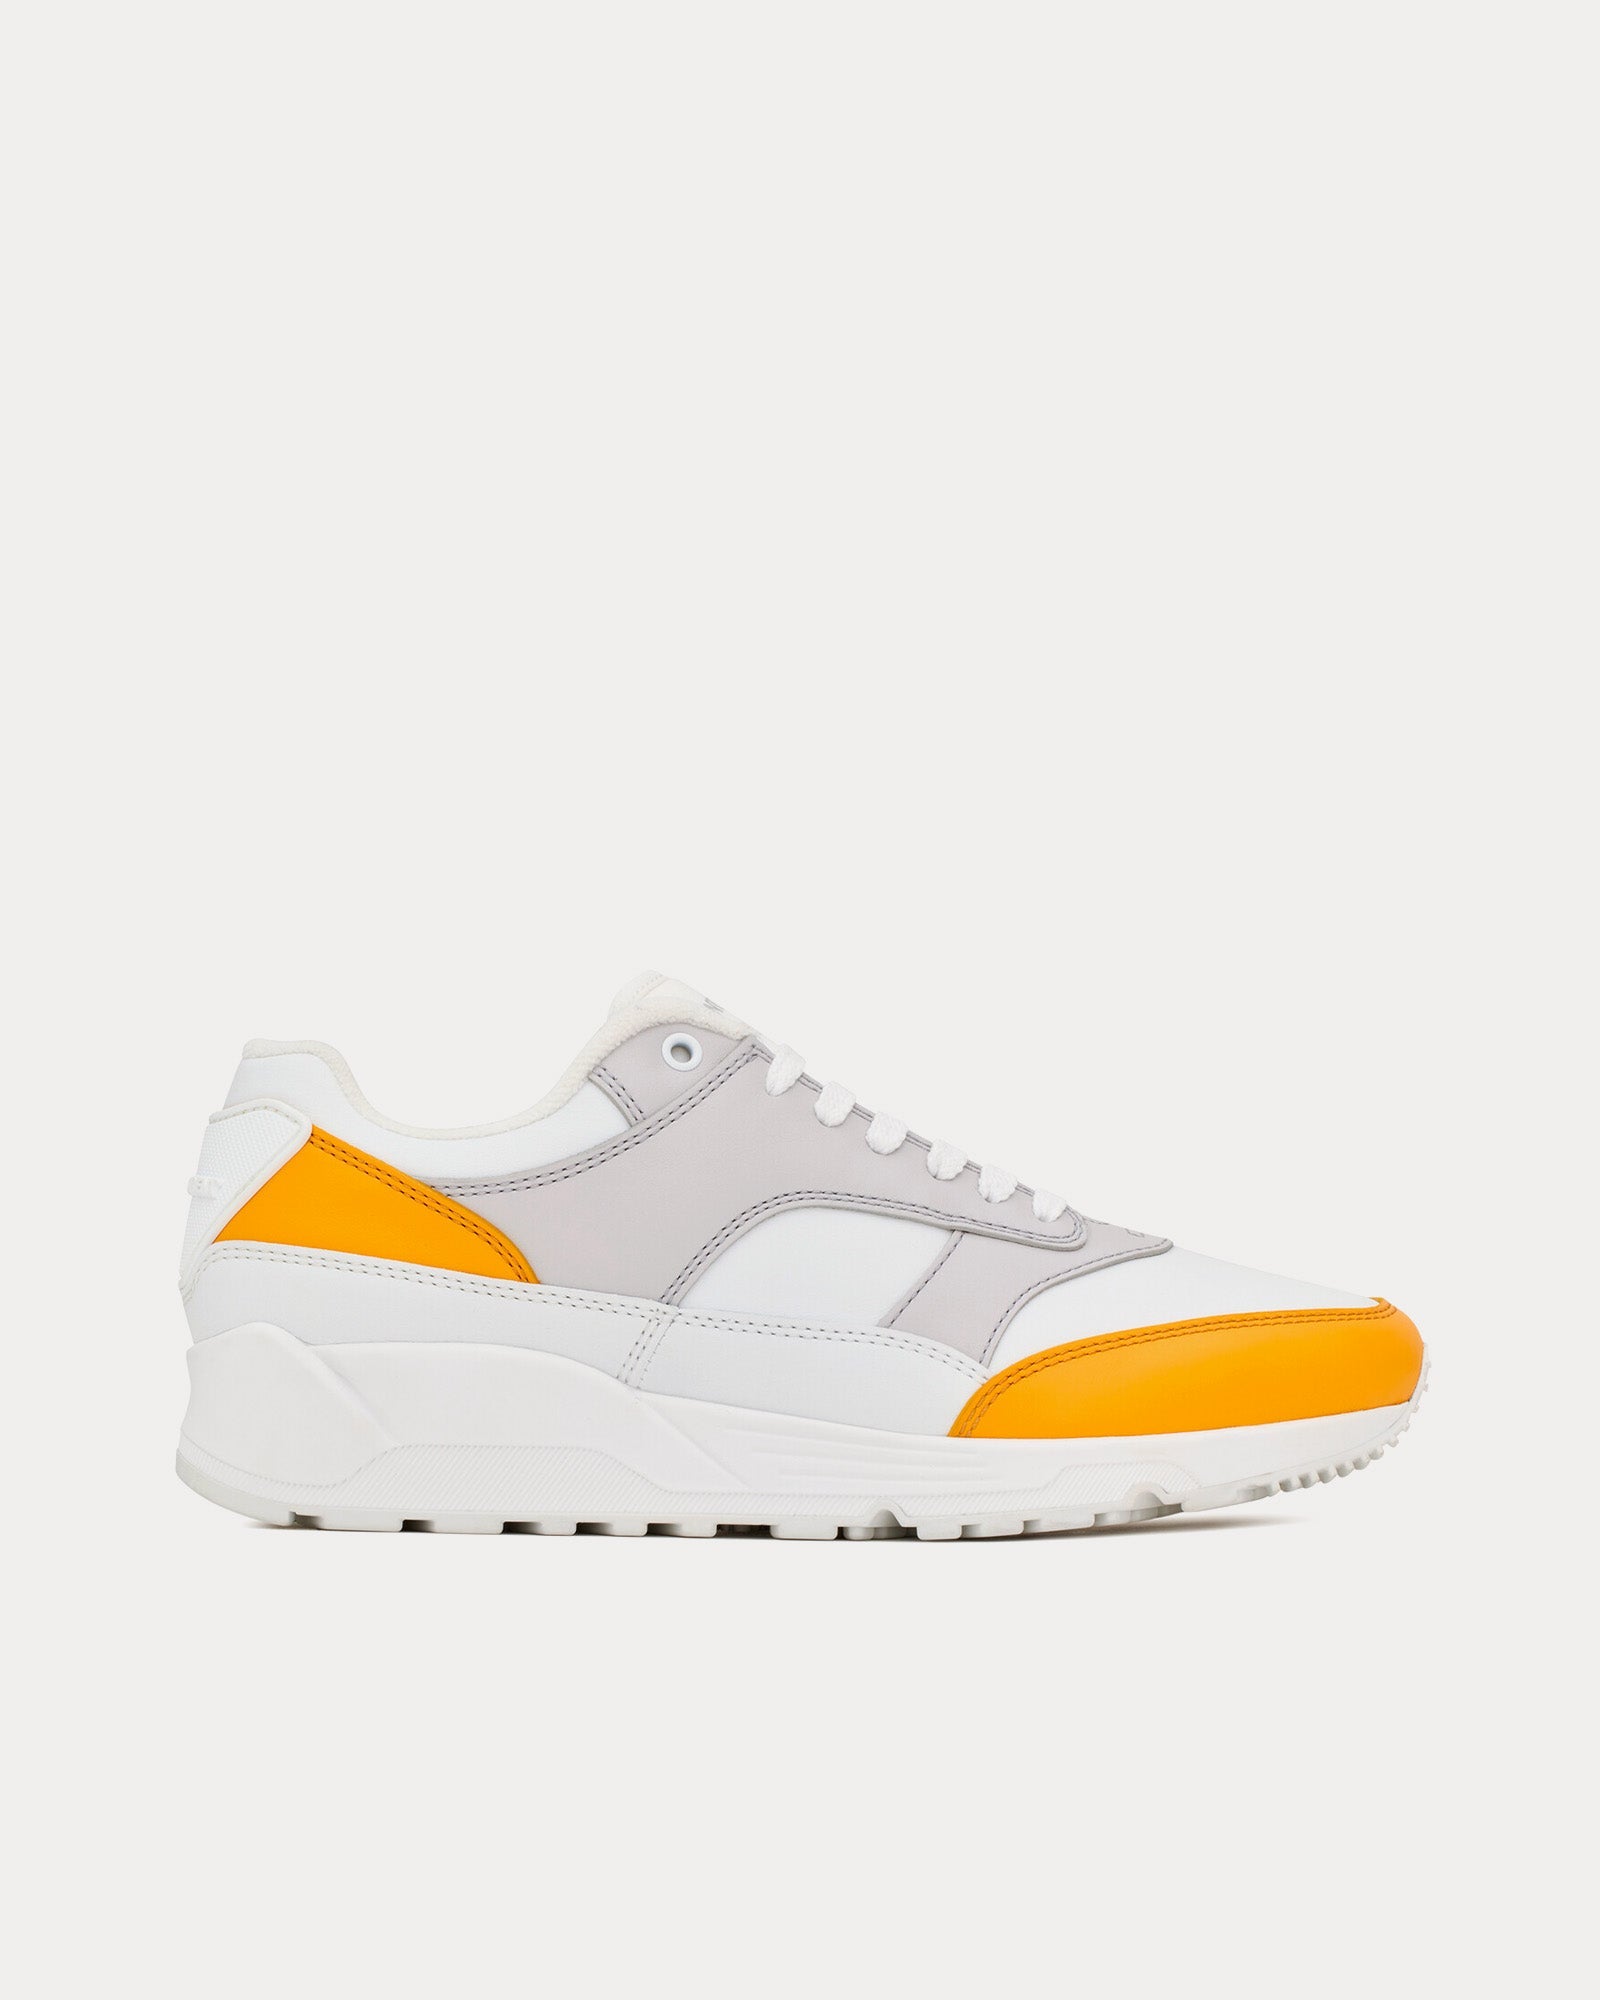 Bump Smooth Leather White / Yellow Low Top Sneakers